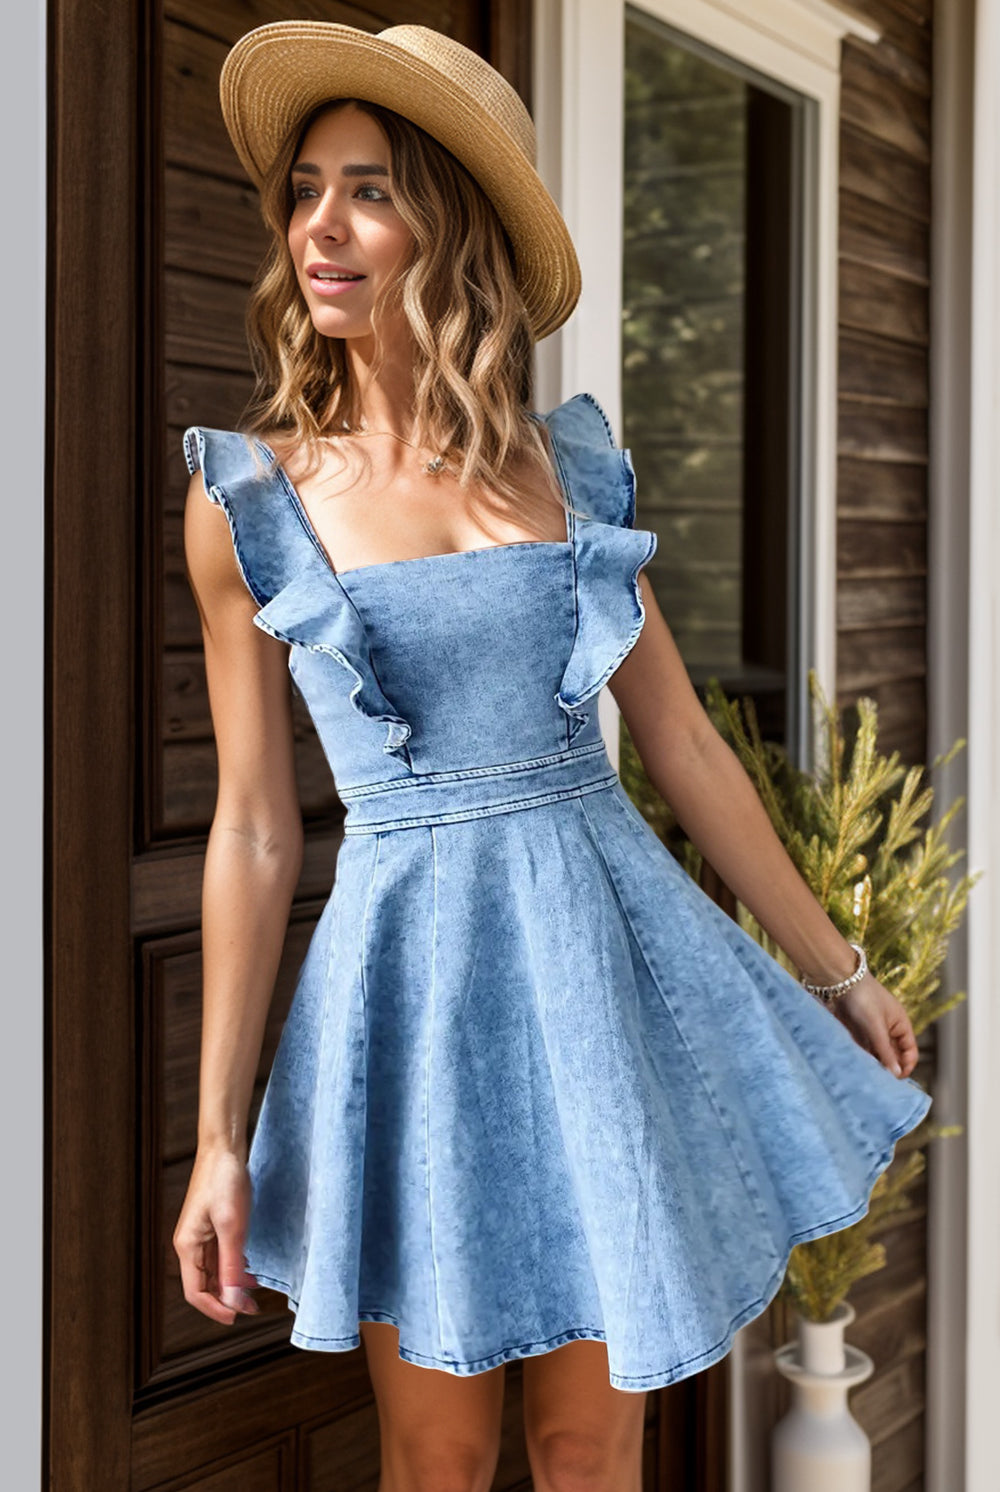 A woman stands confidently in a light blue ruffled mini dress with a square neckline, embodying a blend of casual elegance and youthful charm.